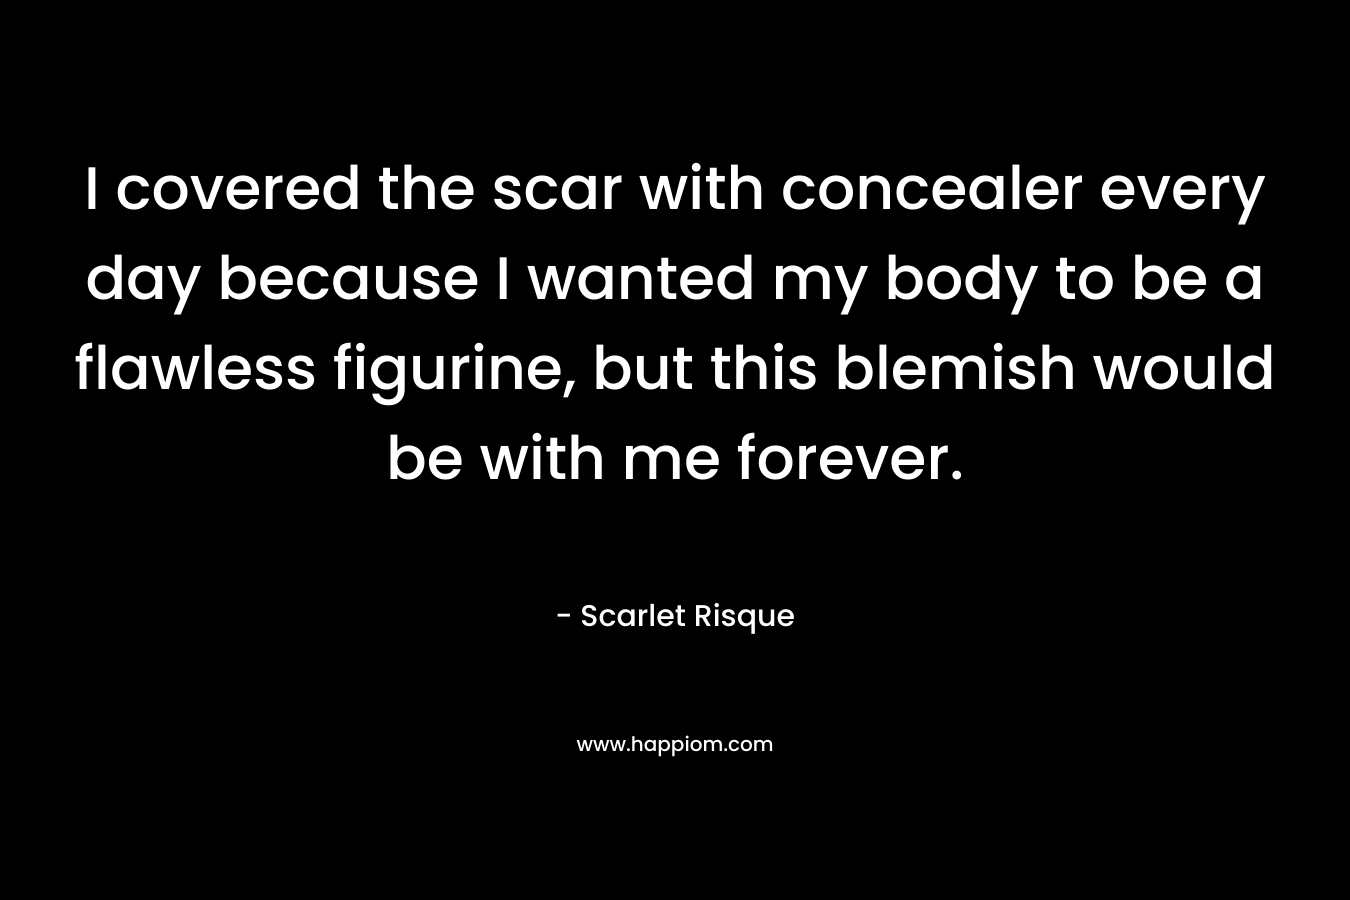 I covered the scar with concealer every day because I wanted my body to be a flawless figurine, but this blemish would be with me forever. – Scarlet Risque